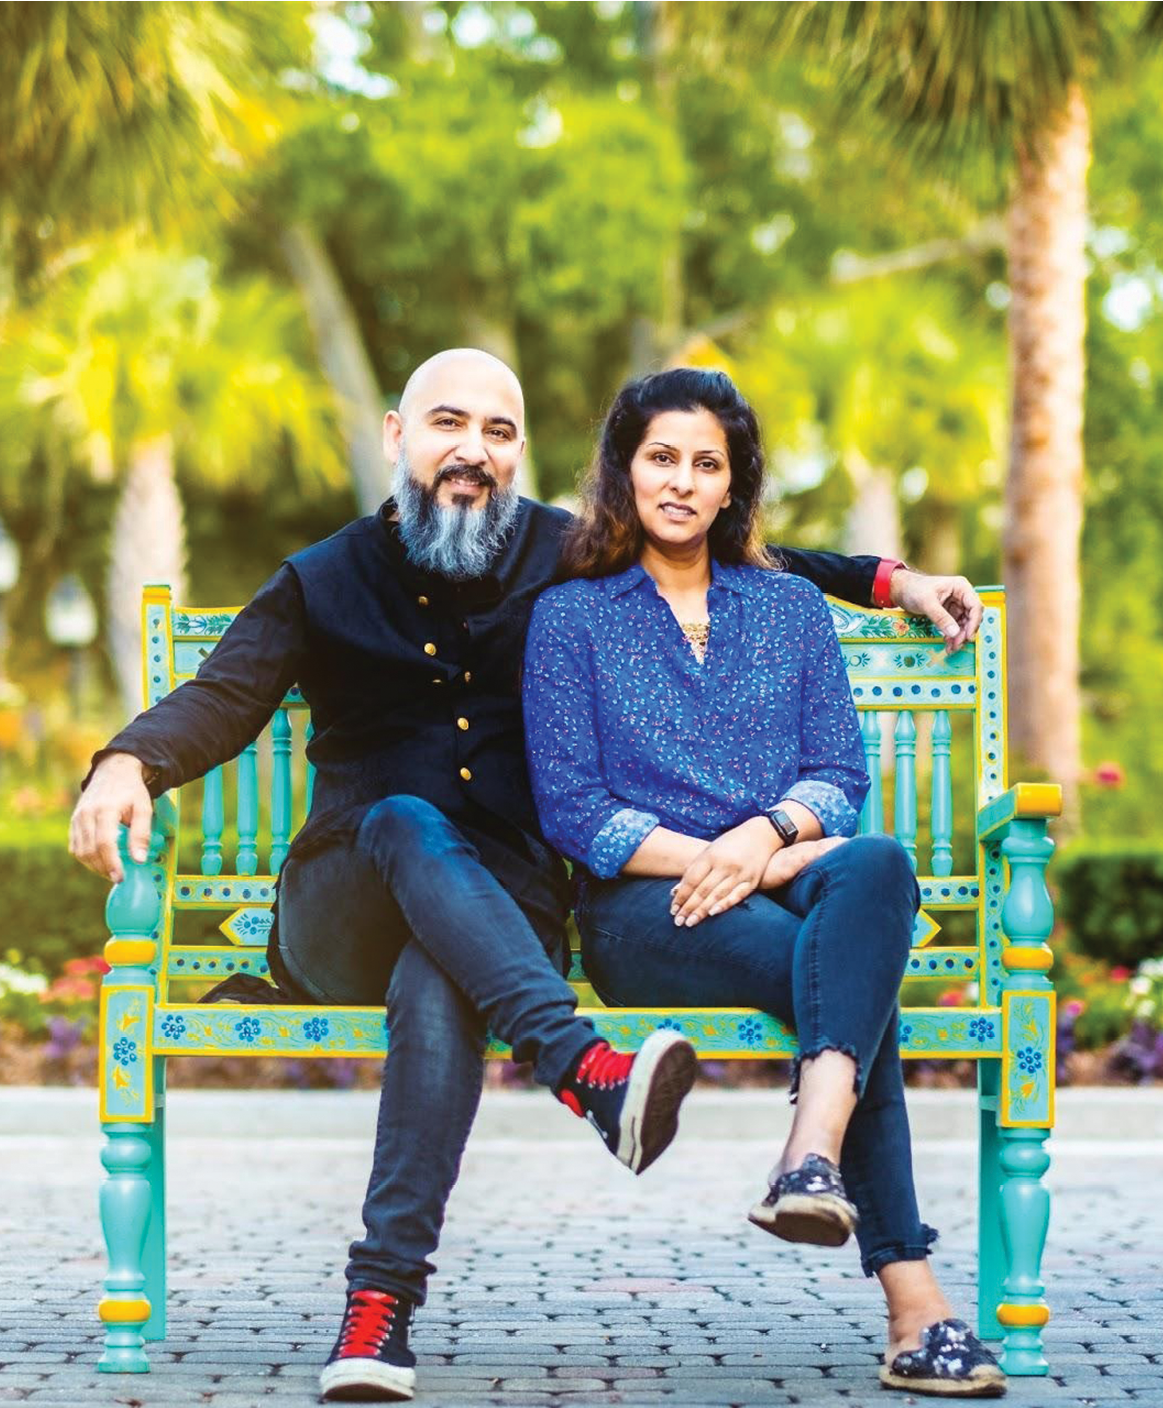 Along with her husband, Raheel Gauba, Maryam Ghaznavi started delivering her Pakistani specialties door-to-door during the pandemic, laying the groundwork for the couple’s restaurants, Malika and Ma’am Saab.